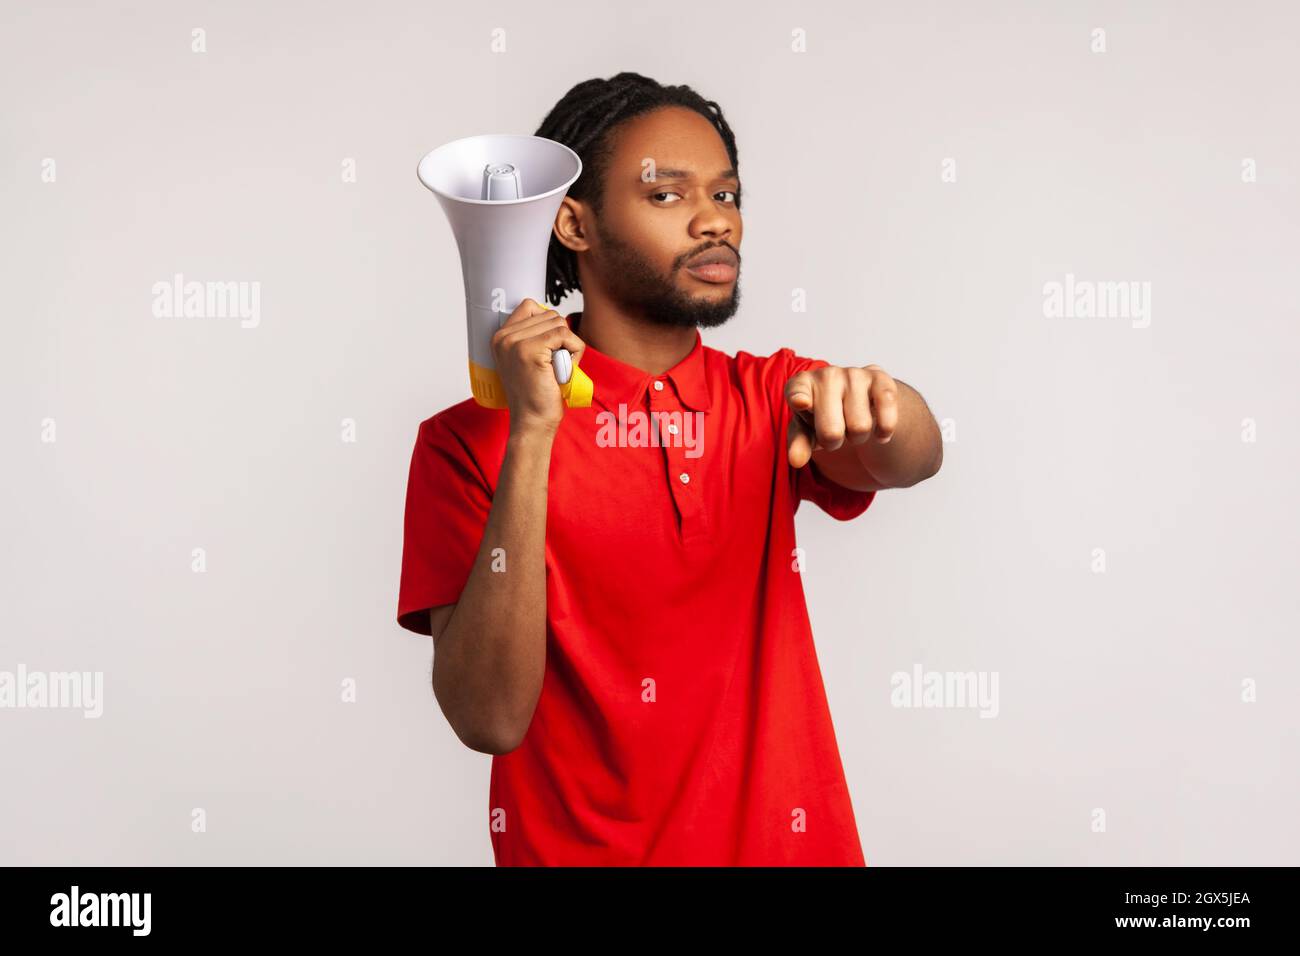 Strict serious man with dreadlocks wearing red casual style T-shirt, pointing finger at camera holding loudspeaker in hand, talking to you, protesting. Indoor studio shot isolated on gray background. Stock Photo